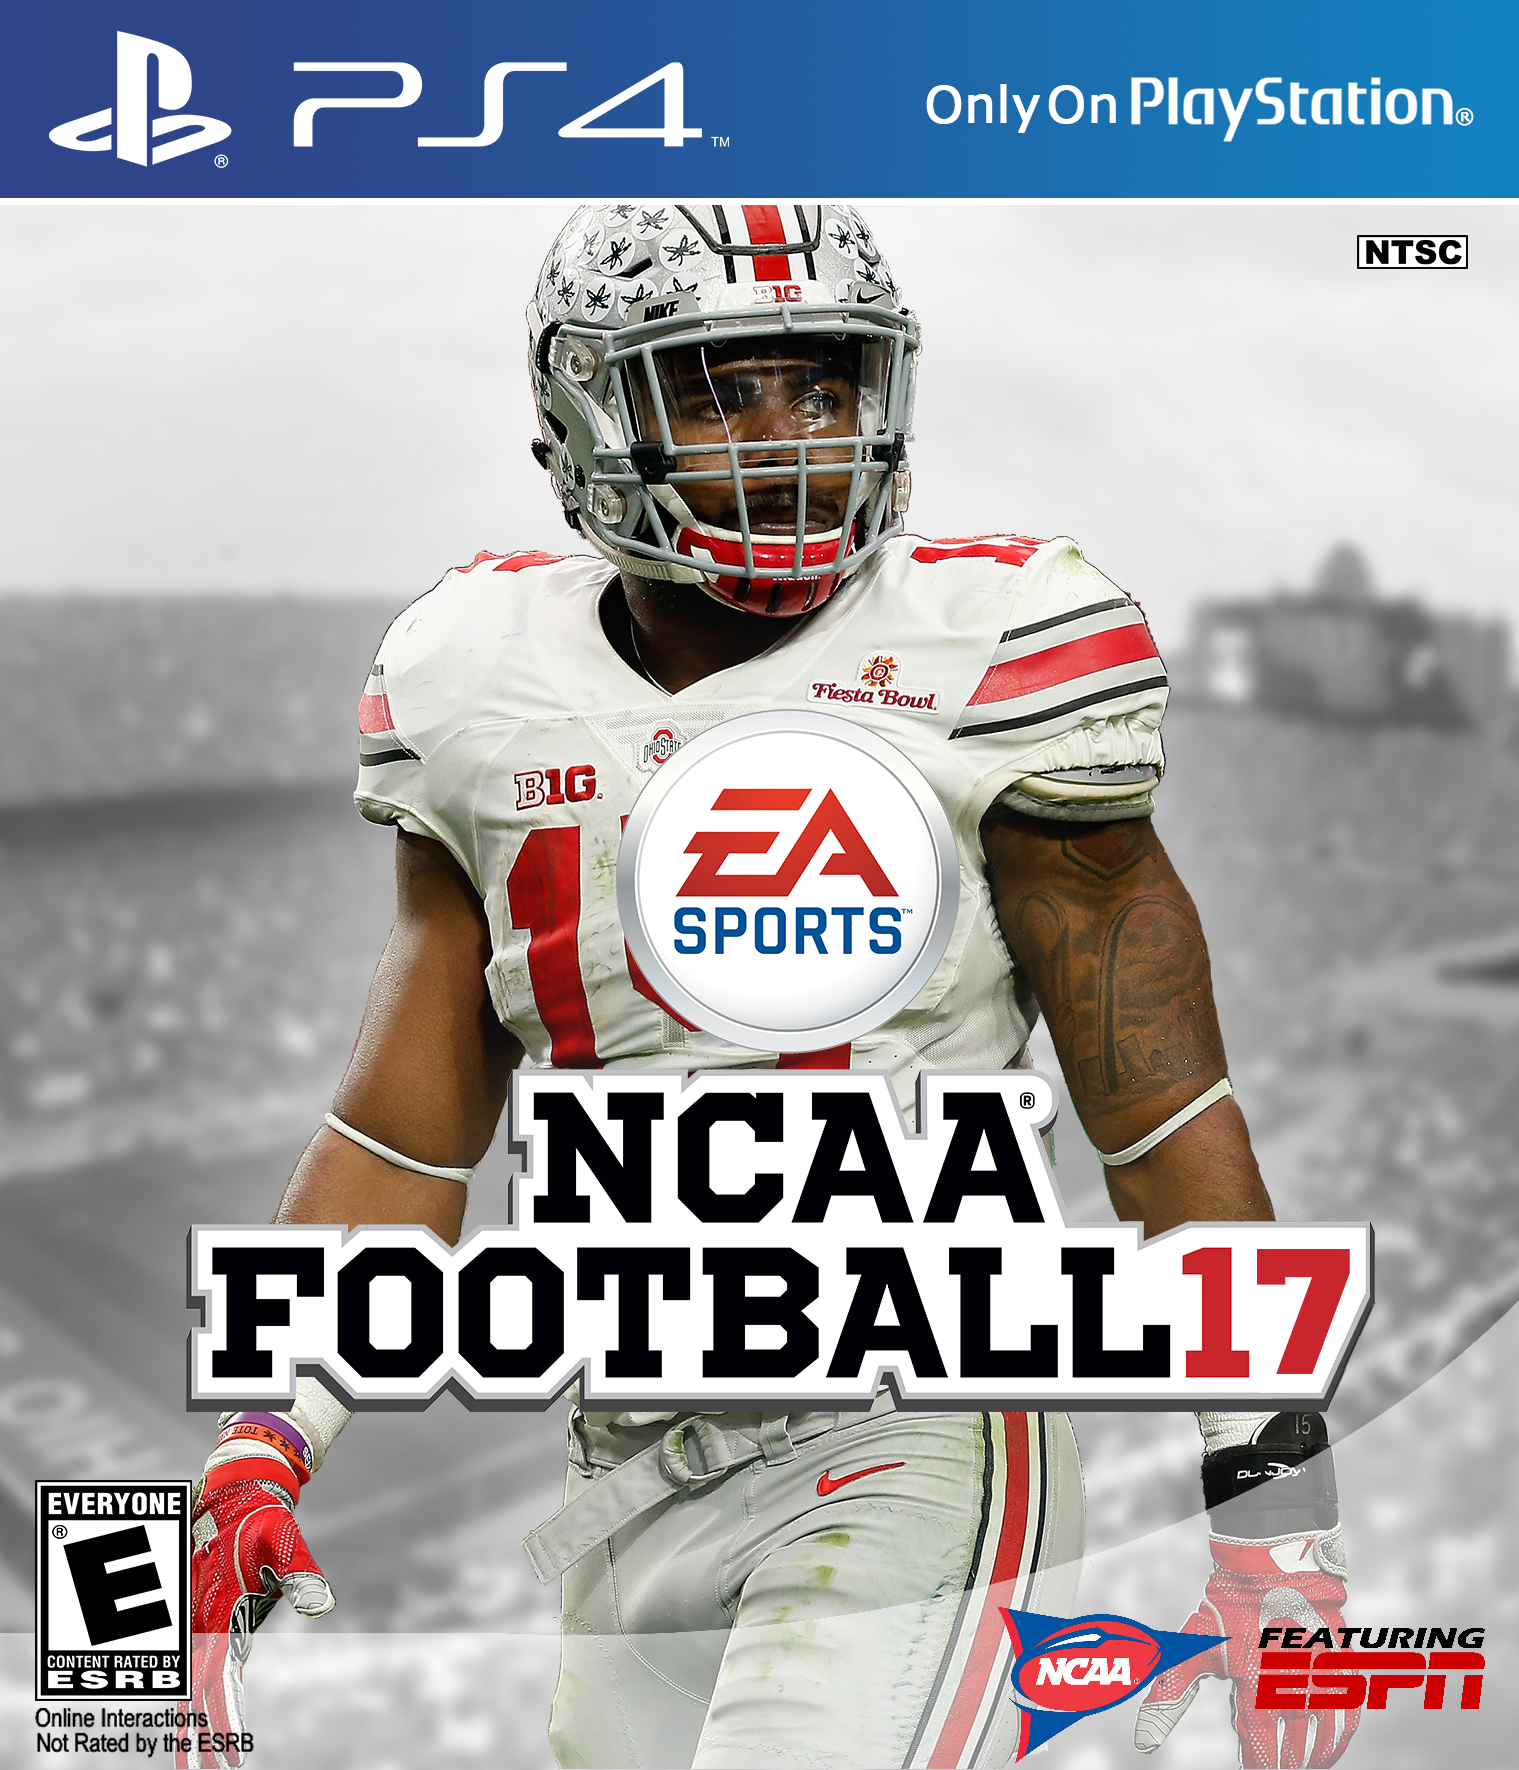 ncaa-football-games-for-ps4-nmyellow